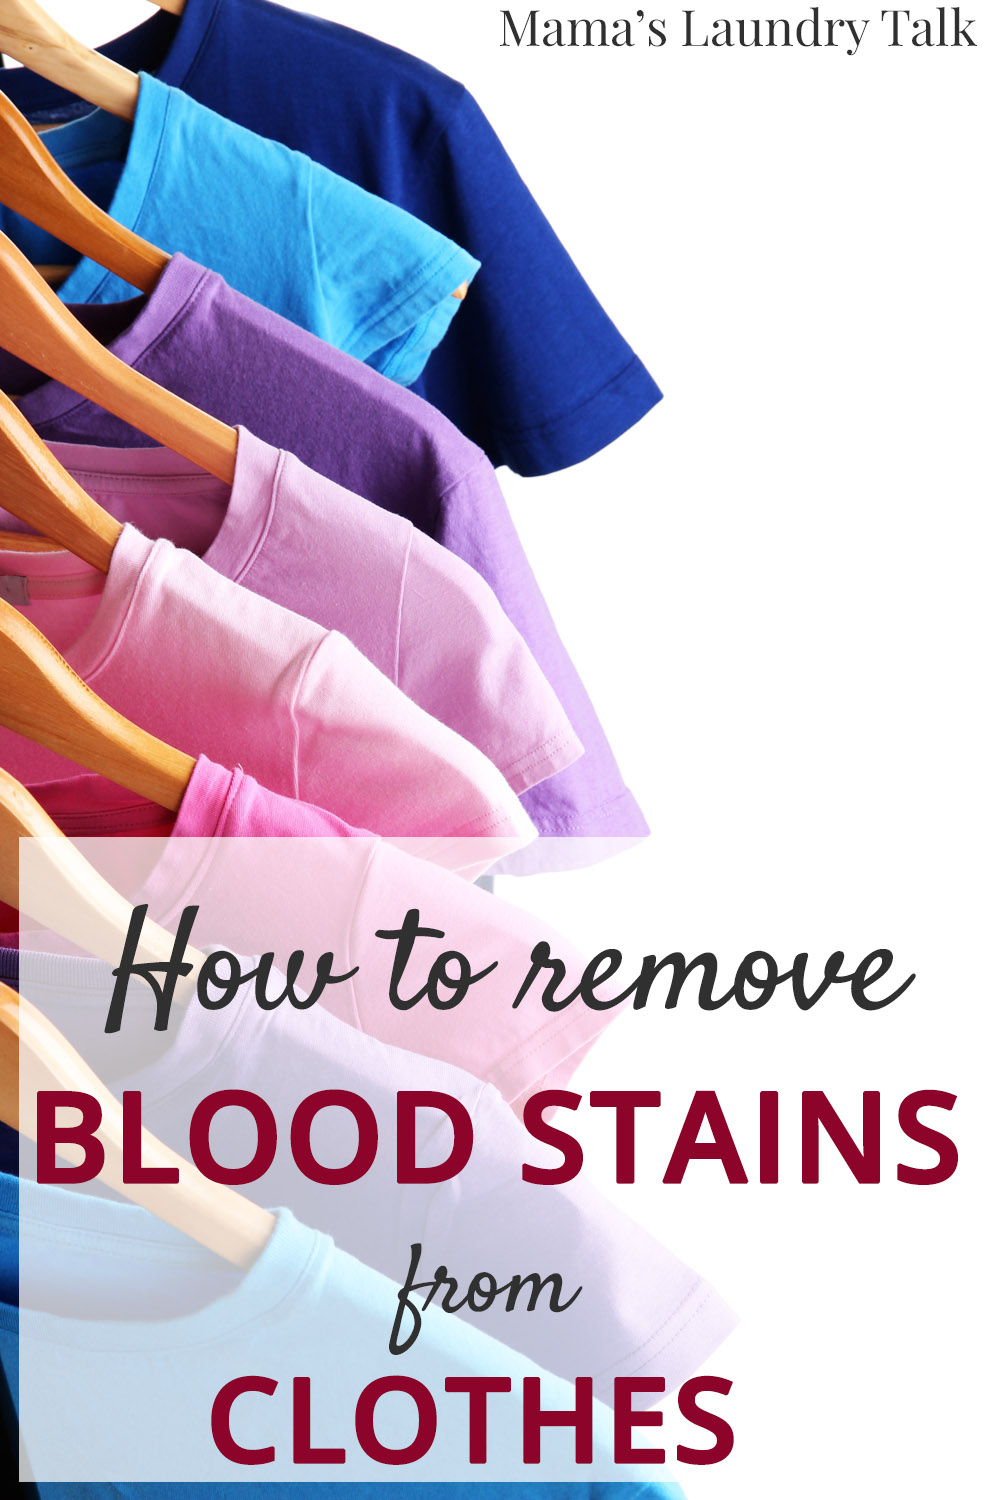 How to Remove Blood Stains Mama's Laundry Talk